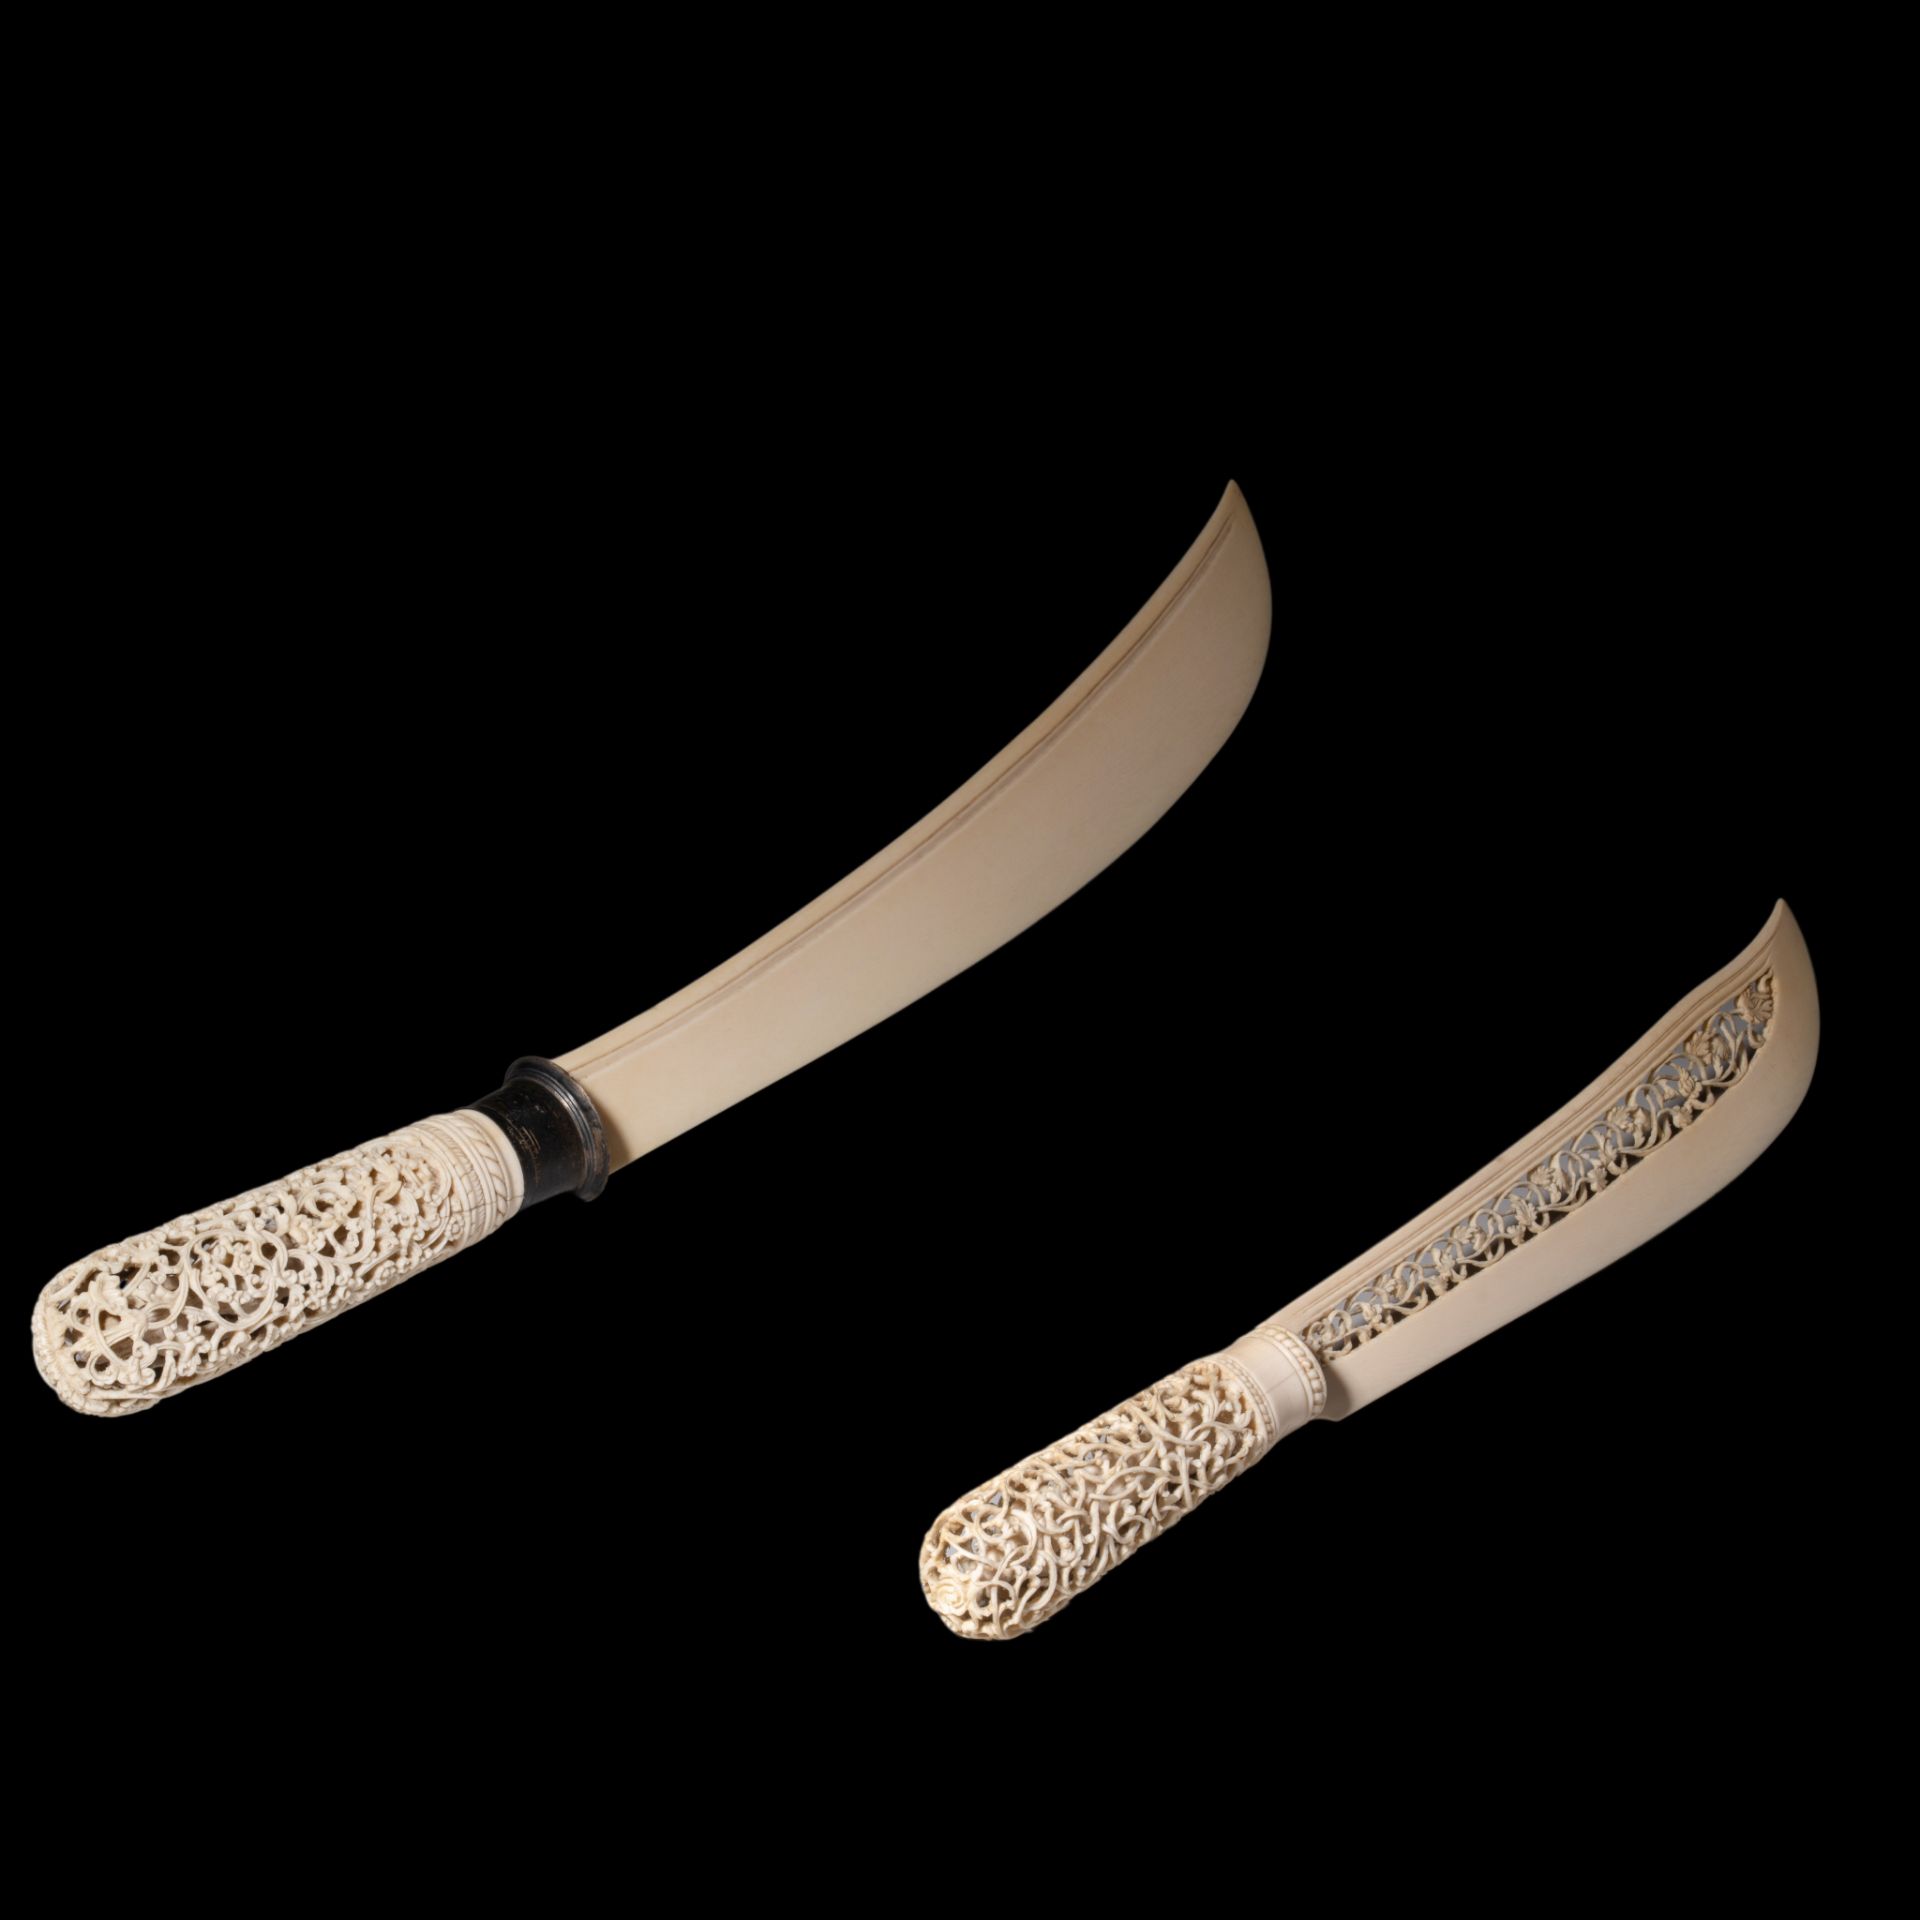 Two Burmese Colonial Ivory paperknives, L 51 cm - 200 g / L 35,8 cm - 80 g, both items are 19th or e - Bild 3 aus 18